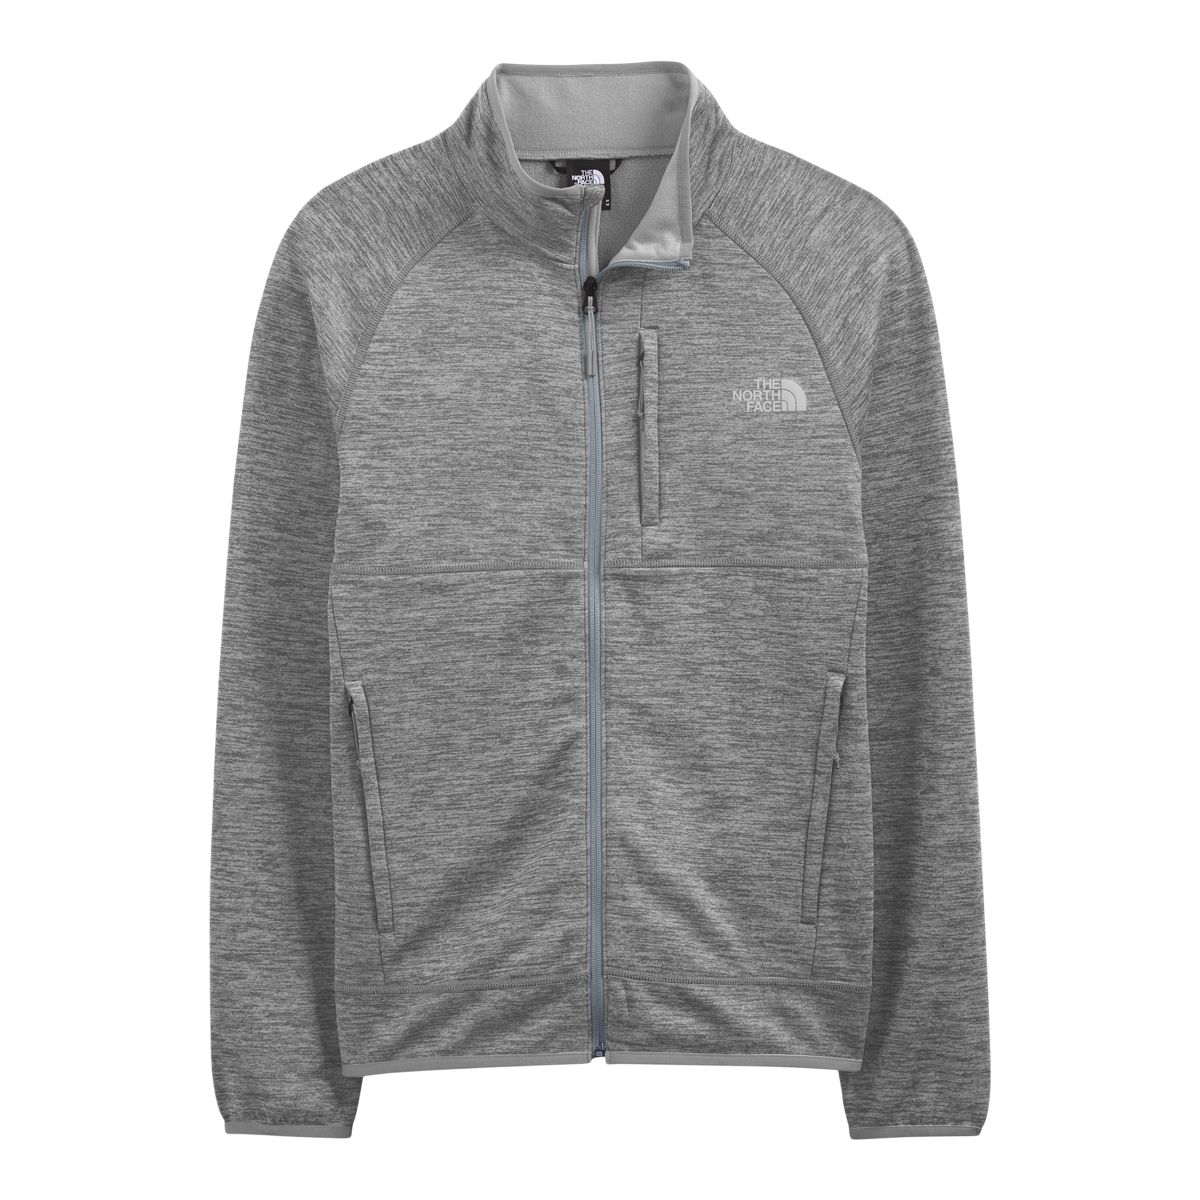 The North Face Men's Canyonlands Full Zip Long Sleeve Top